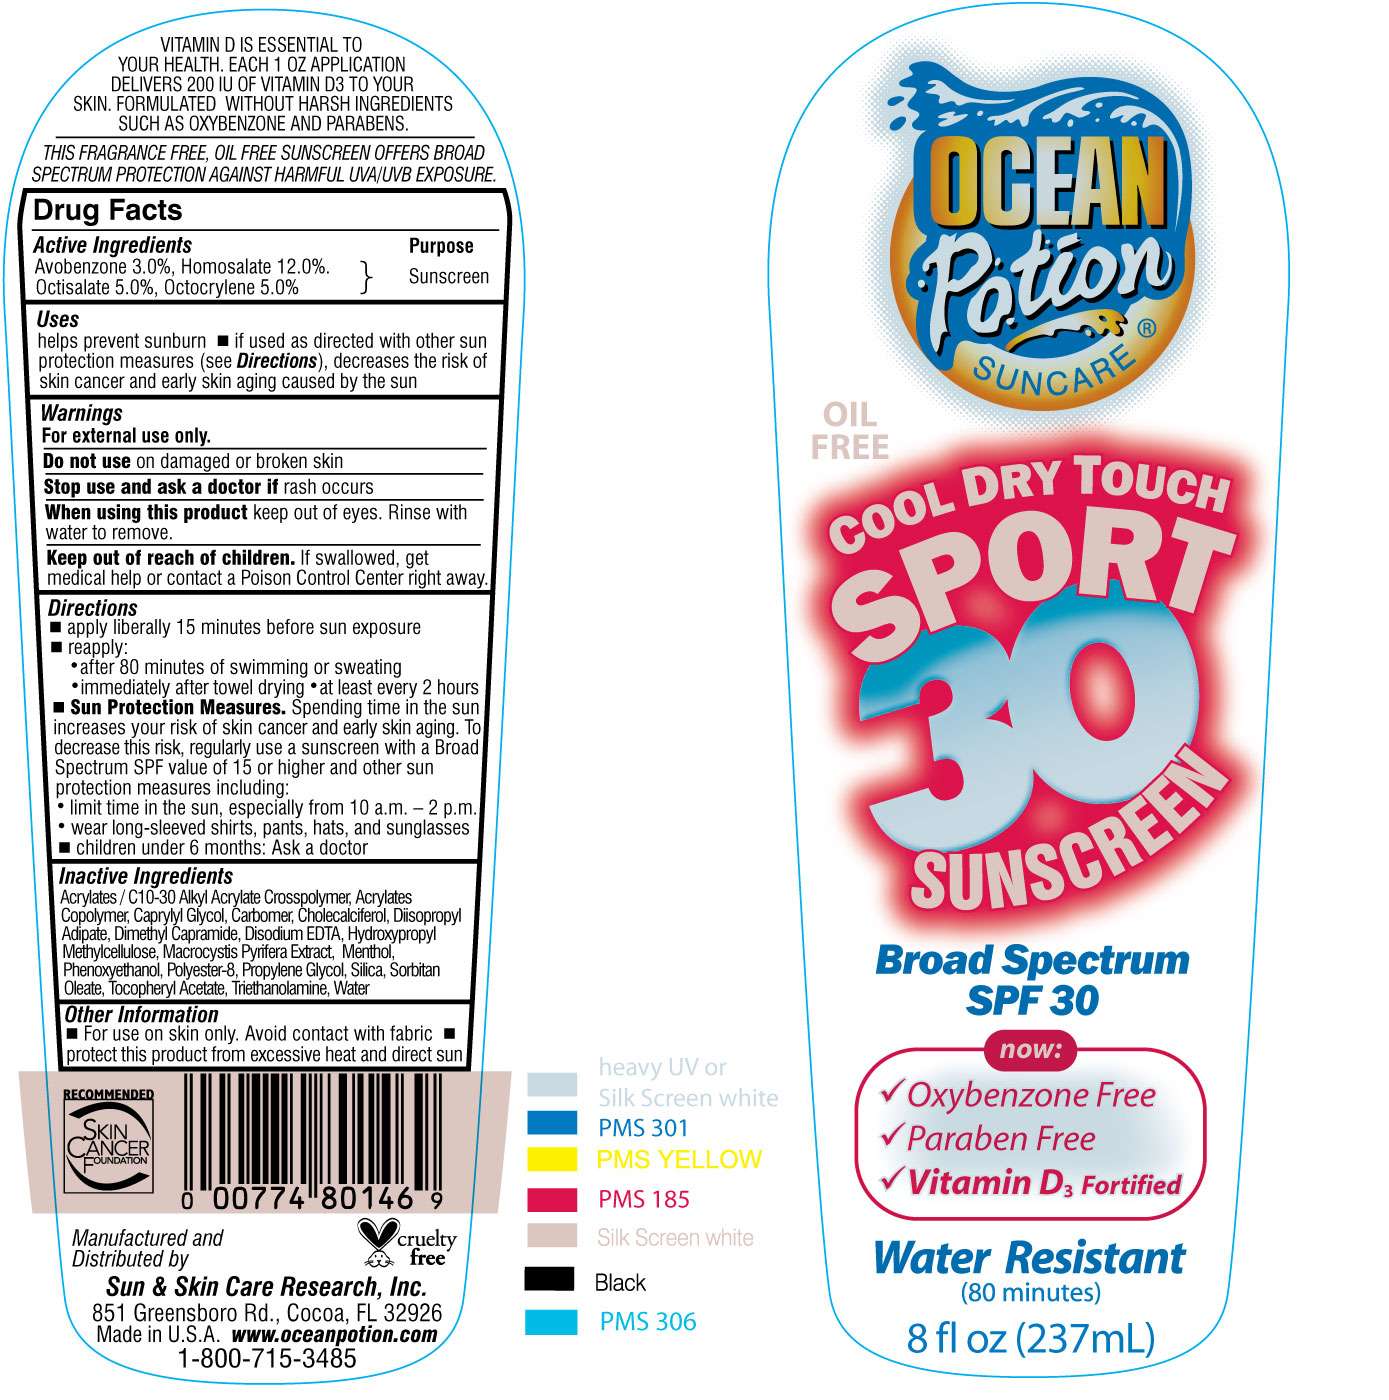 Ocean Potion Cool Dry Touch Sport 30 Sunscreen